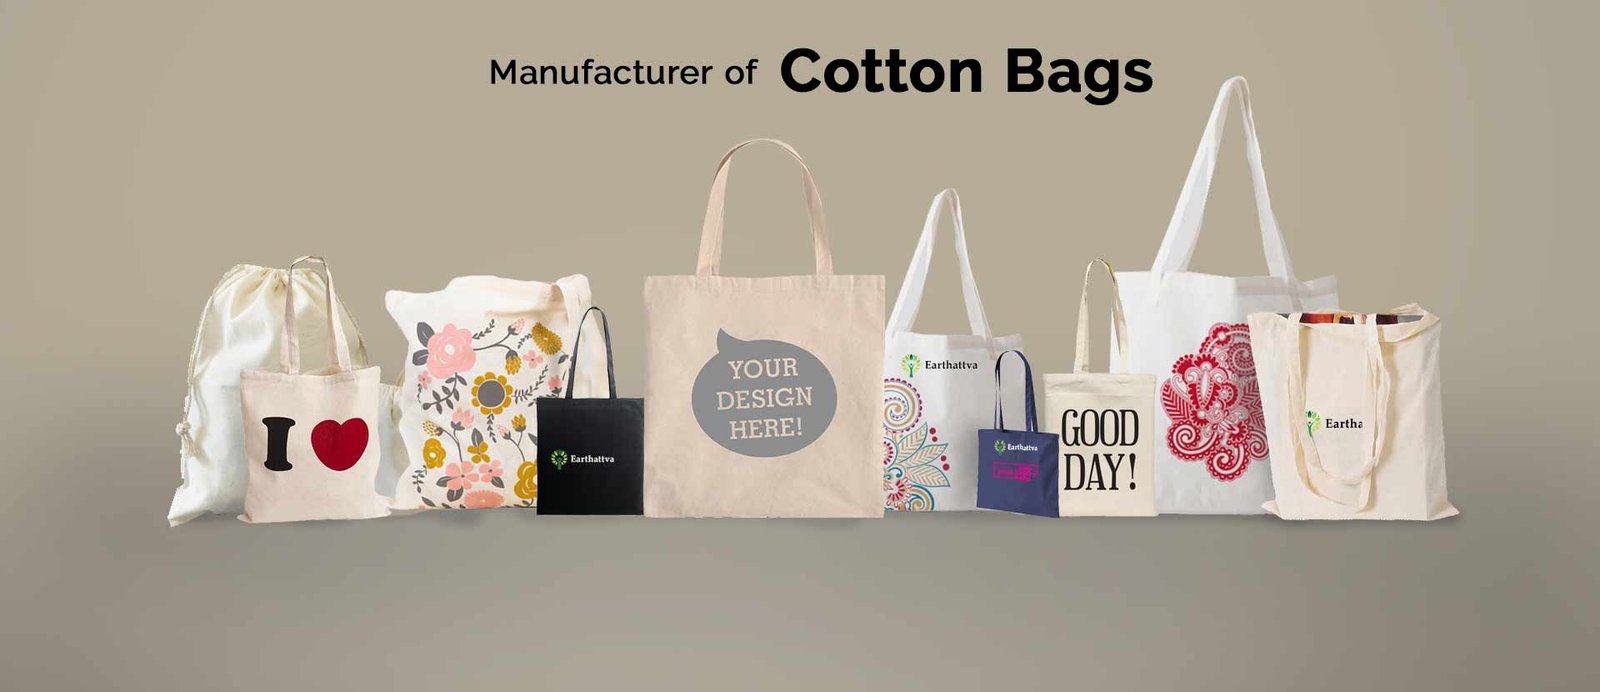 Cotton Bags India, Largest Manufacturers in India of Cotton Bags, Canvas  Cotton Totes,Canvas Bags, Calico Bags, Cotton Convention Totes, Non-Woven  Bags, Aprons, Cotton Mittens, Padfolios, Pot Holders, Designer Bags, Heat  Transfers, Printed